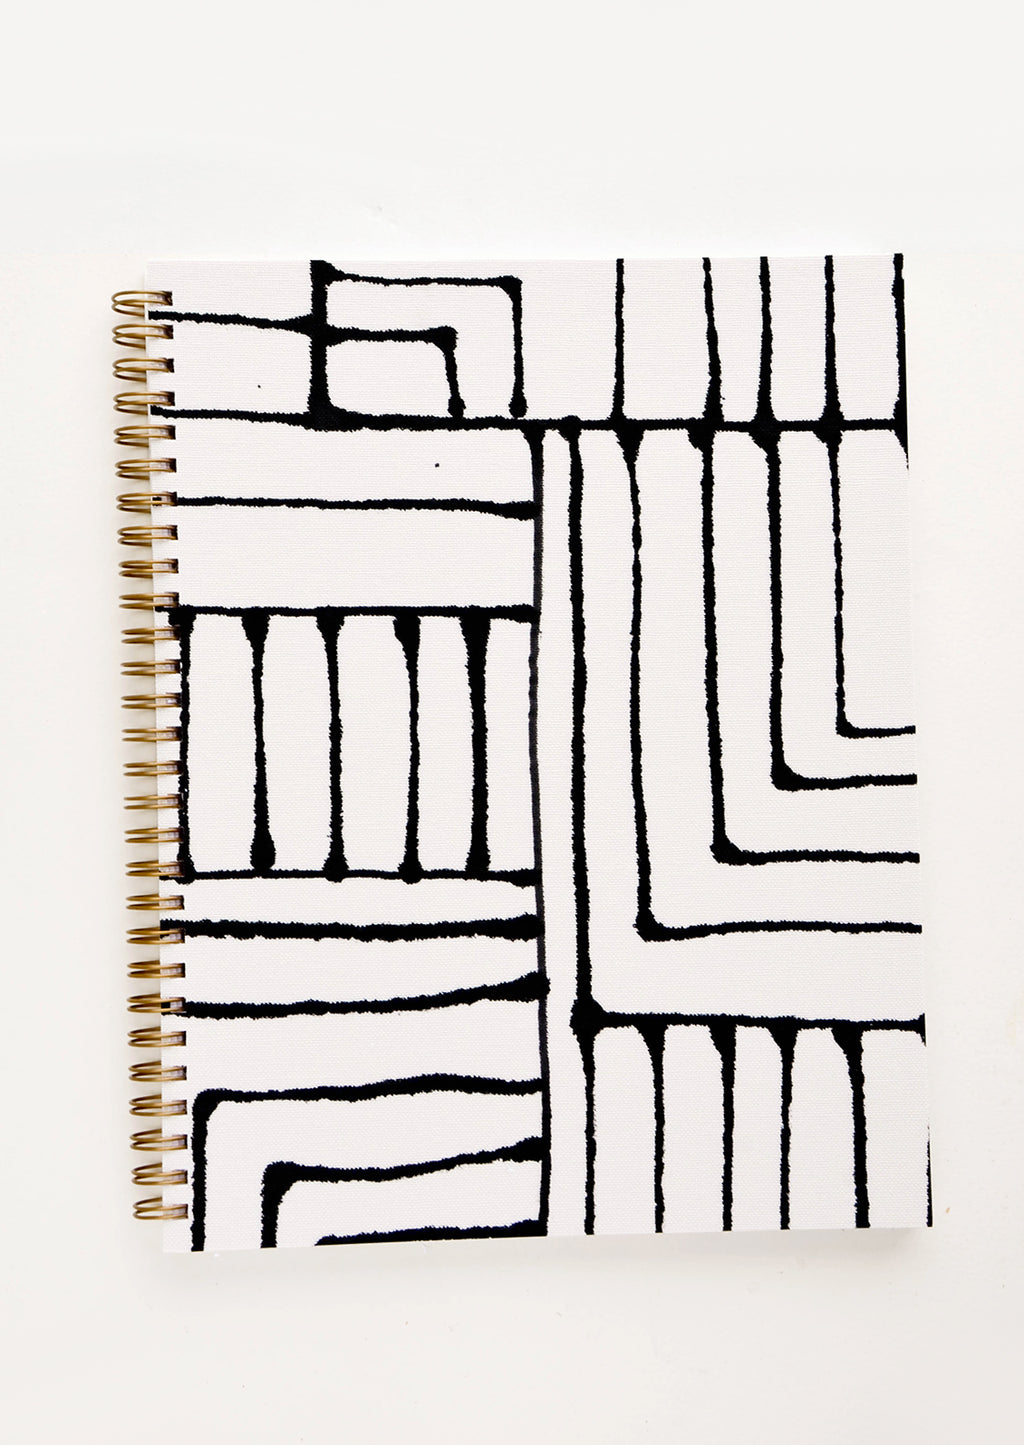 1: Spiral bound notebook with bookcloth cover in black and white line pattern